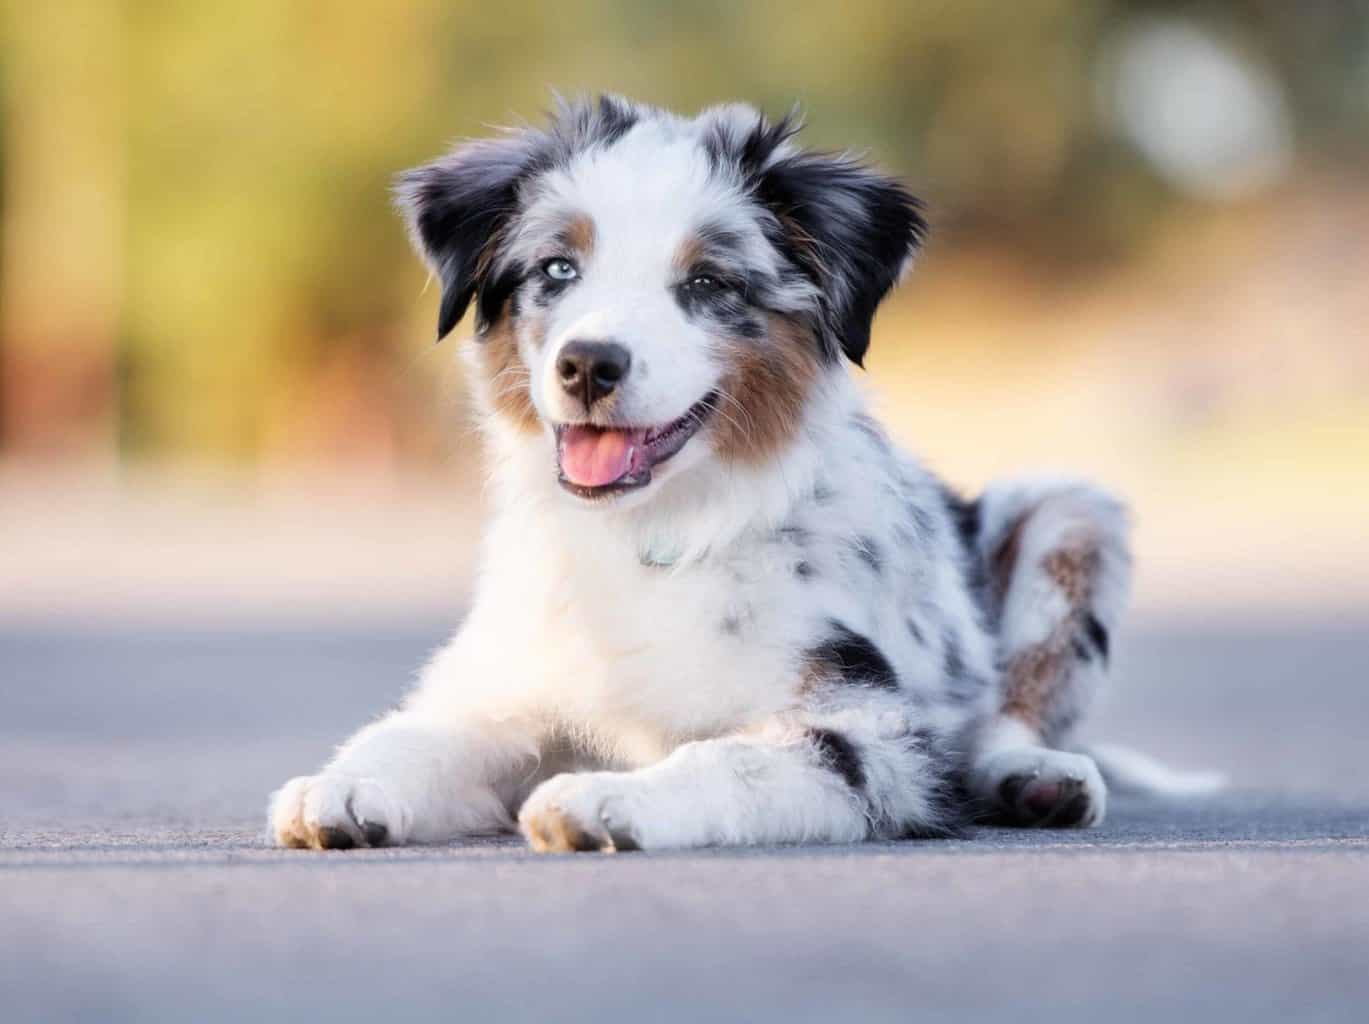 Australian shepherd puppy outside. The Aussie is one of the cutest dog breeds.